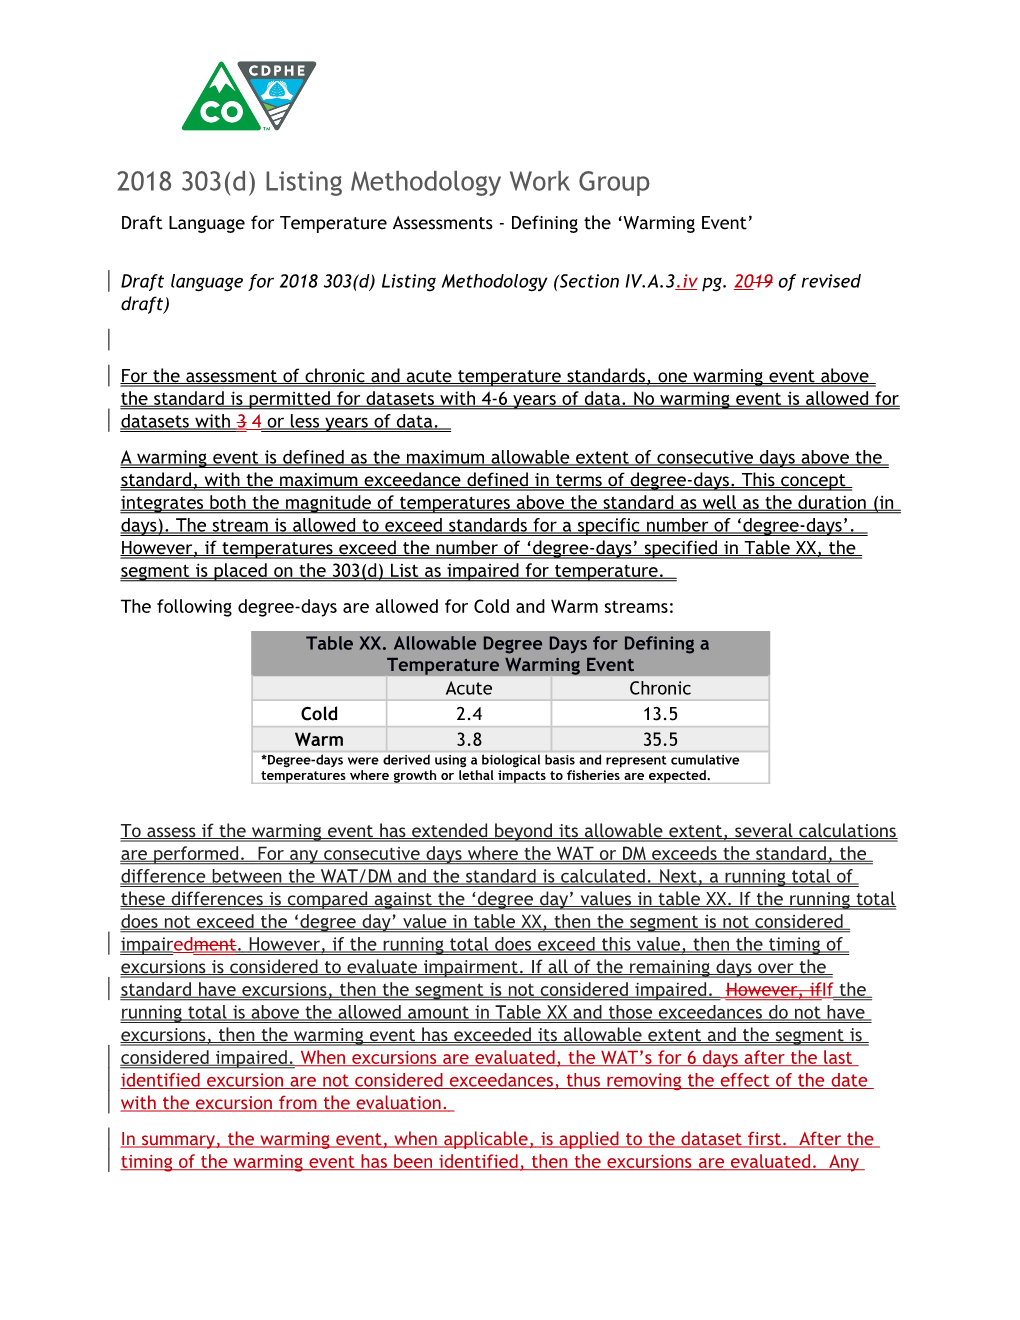 Draft Language for 2018 303(D) Listing Methodology (Section IV.A.3 .Iv Pg. 2019 of Revised